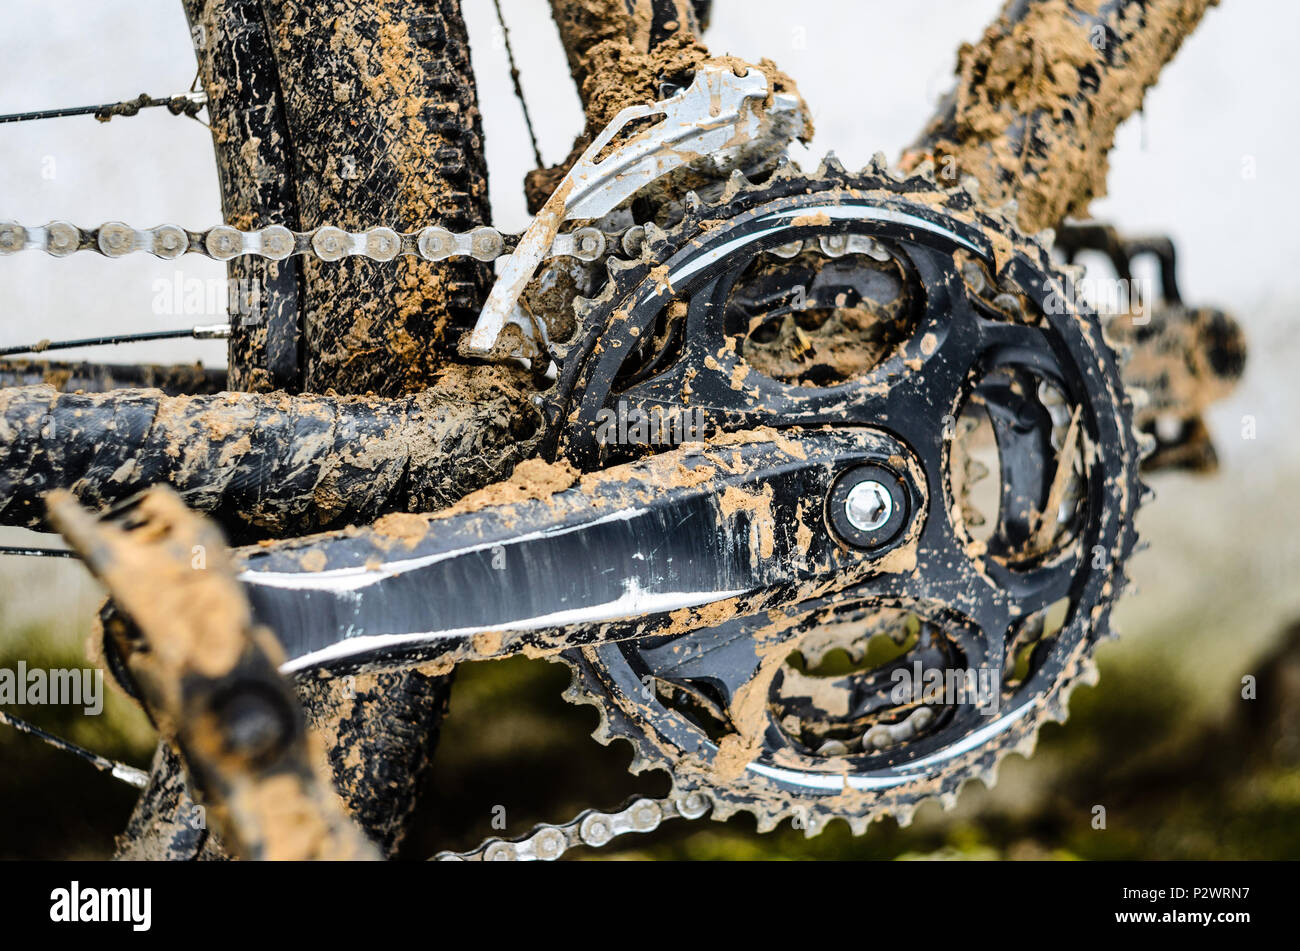 Mountain Bike Transmission in Mud. Dirty Chain Drive of Mountain Bike After  Riding in Bad Weather Stock Photo - Alamy